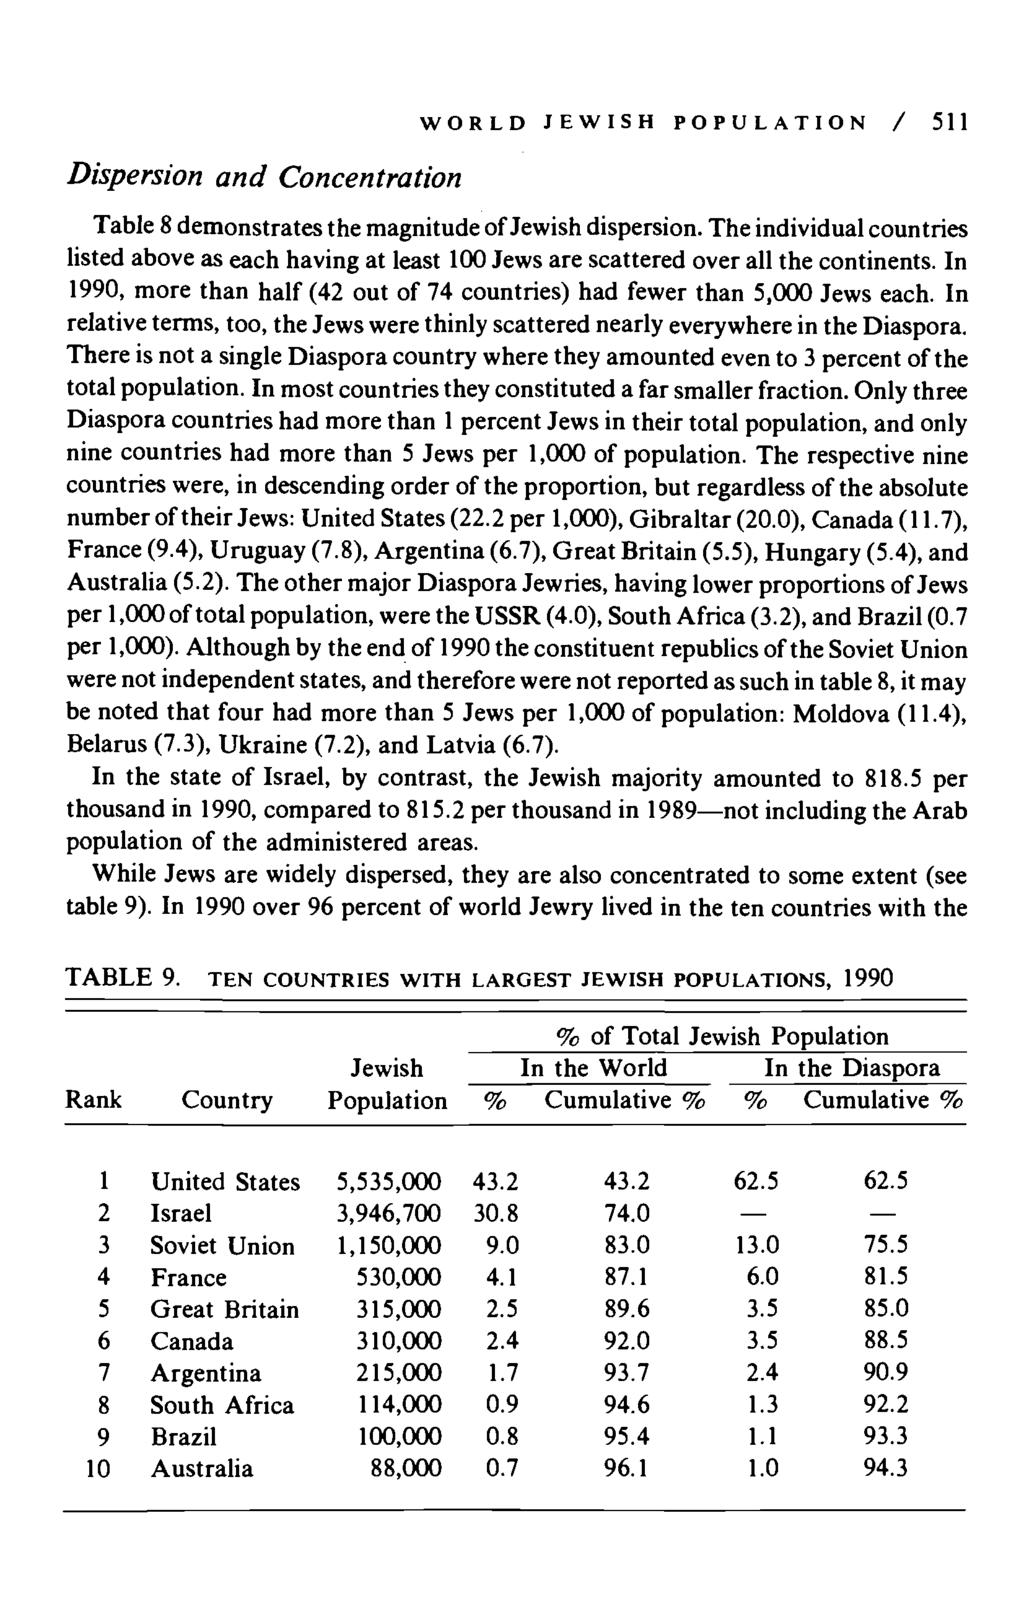 ispersion and Concentration WORL JEWISH POPULATION / 511 Table 8 demonstrates the magnitude of Jewish dispersion.